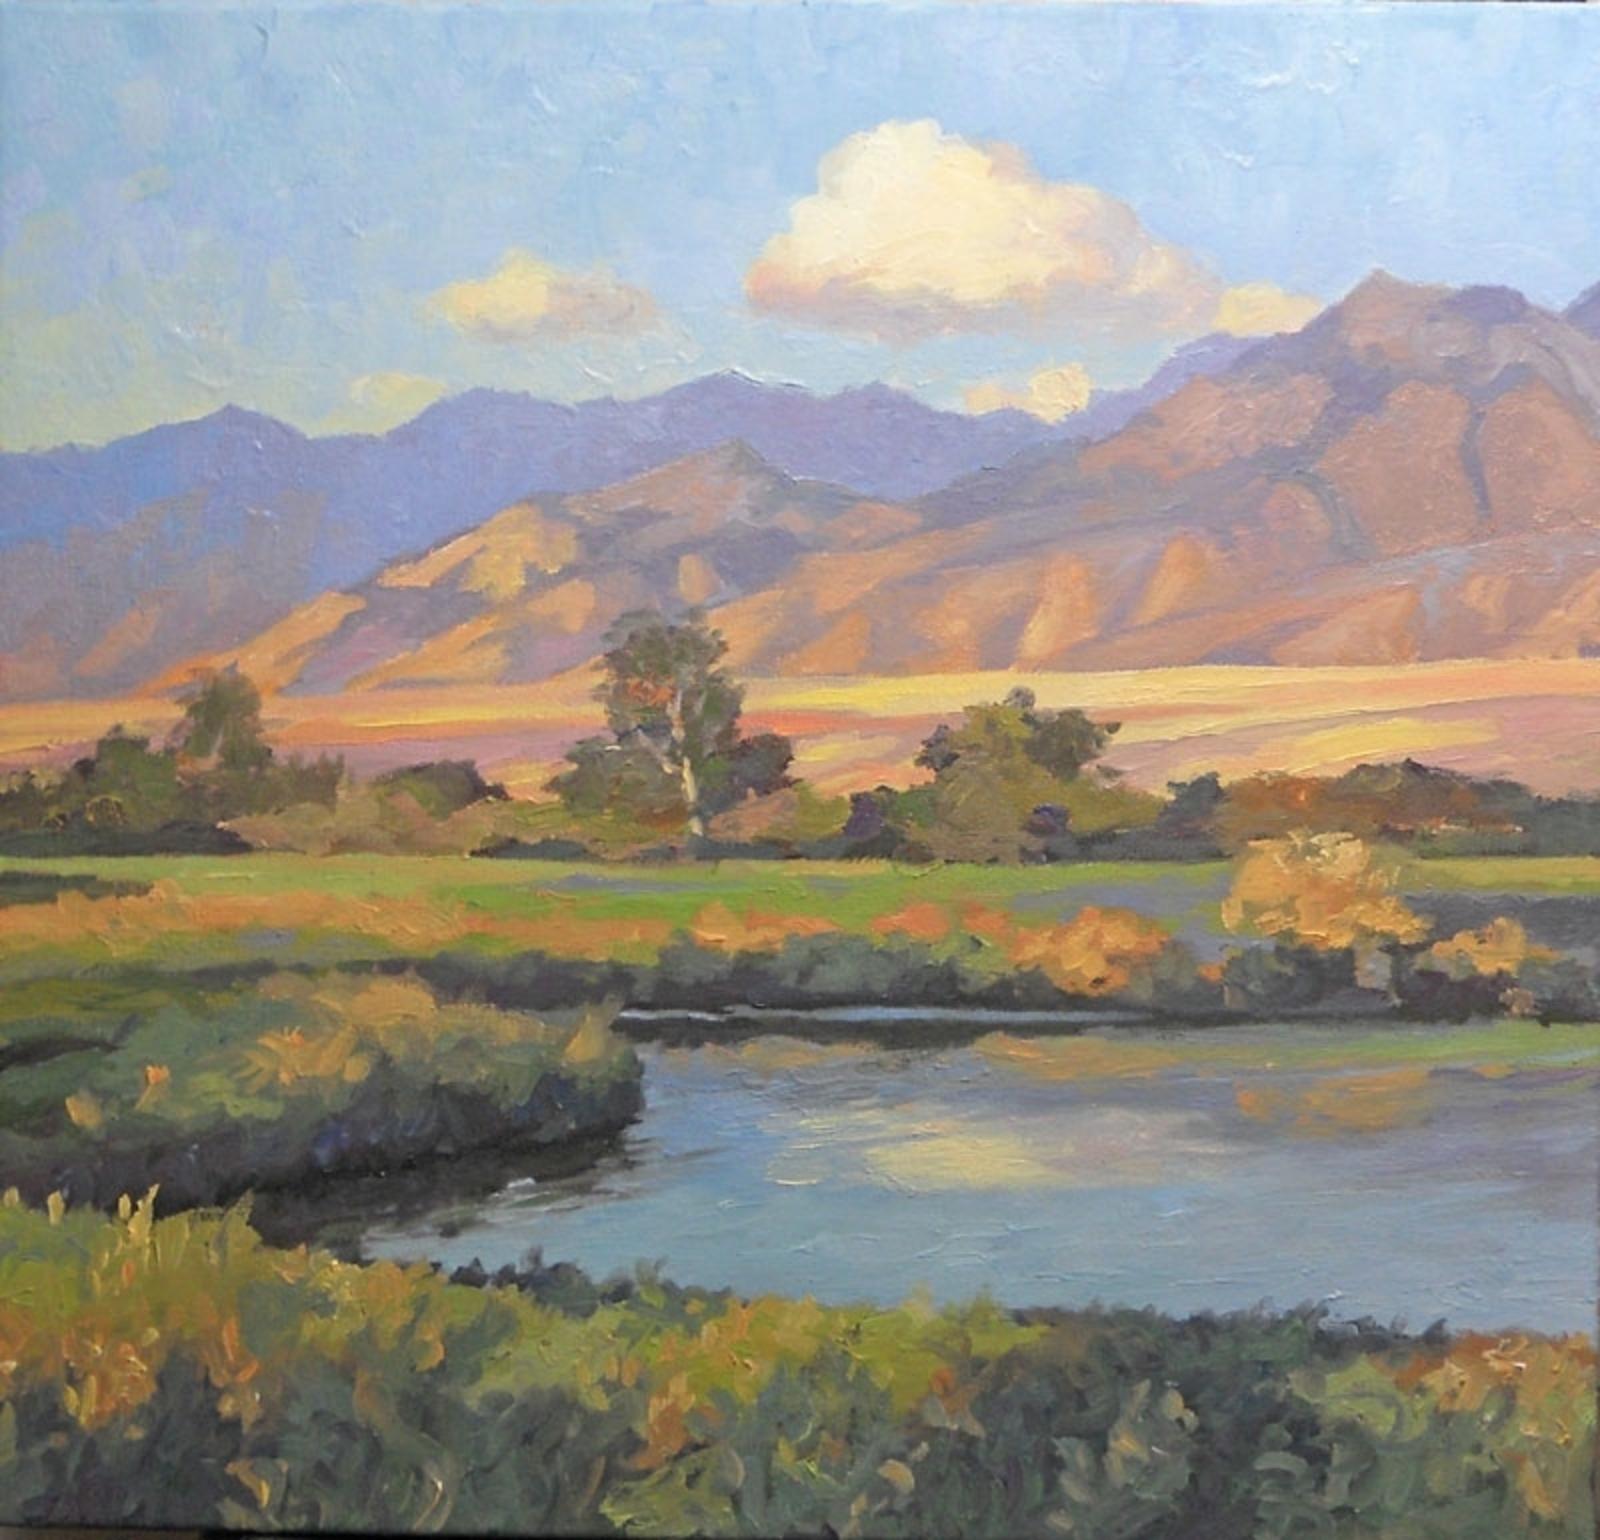 &quot;Bridger Mountains—Summer&quot; by painter Bruce Park (https://www.bruceparkarts.com).  Native people knew the area stretching west of present-day Bozeman as the &quot;Valley of Flowers&quot;.